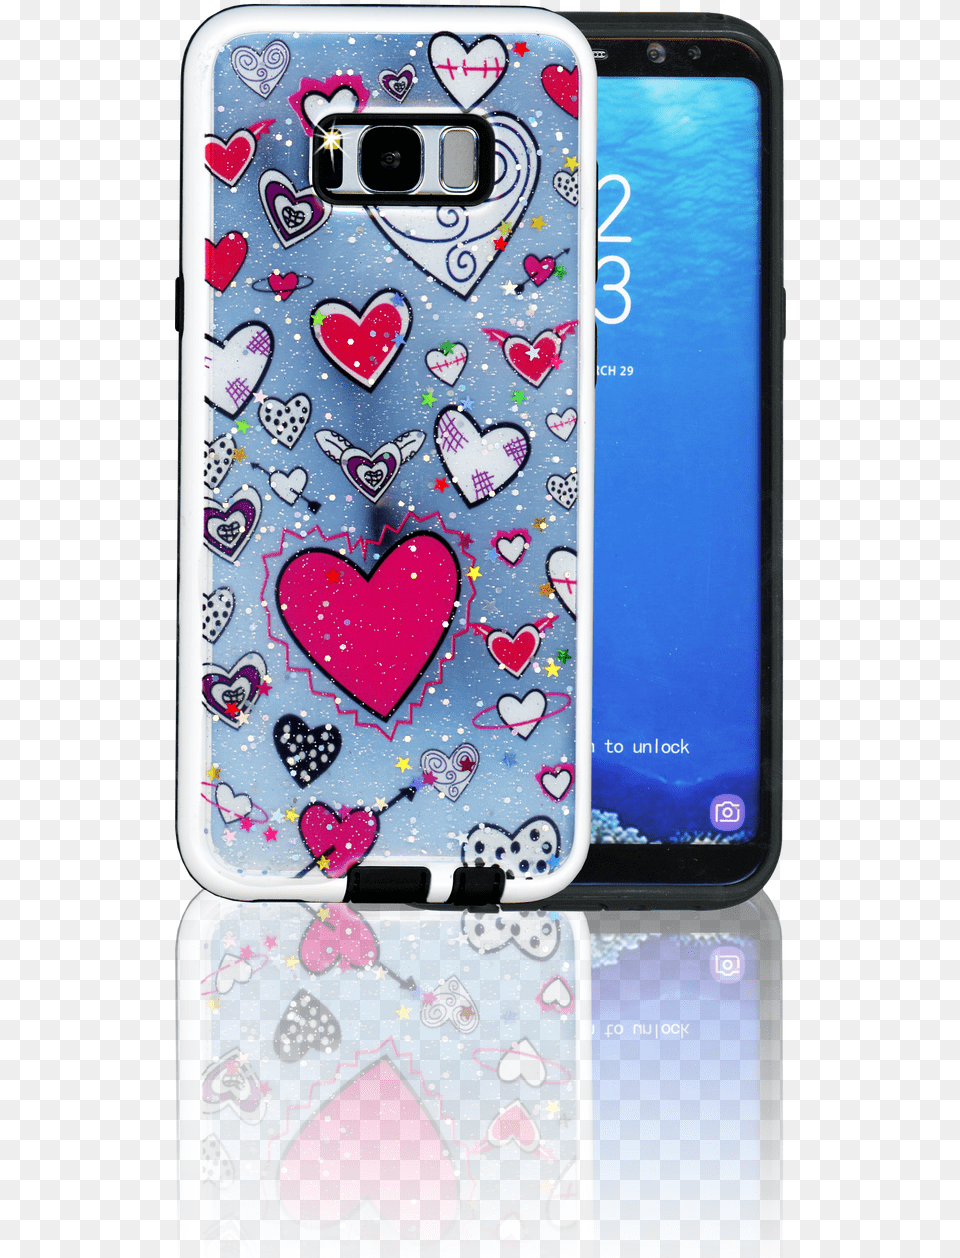 Samsung Galaxy S8 Plus Mm 3d Heart Heart, Electronics, Mobile Phone, Phone Png